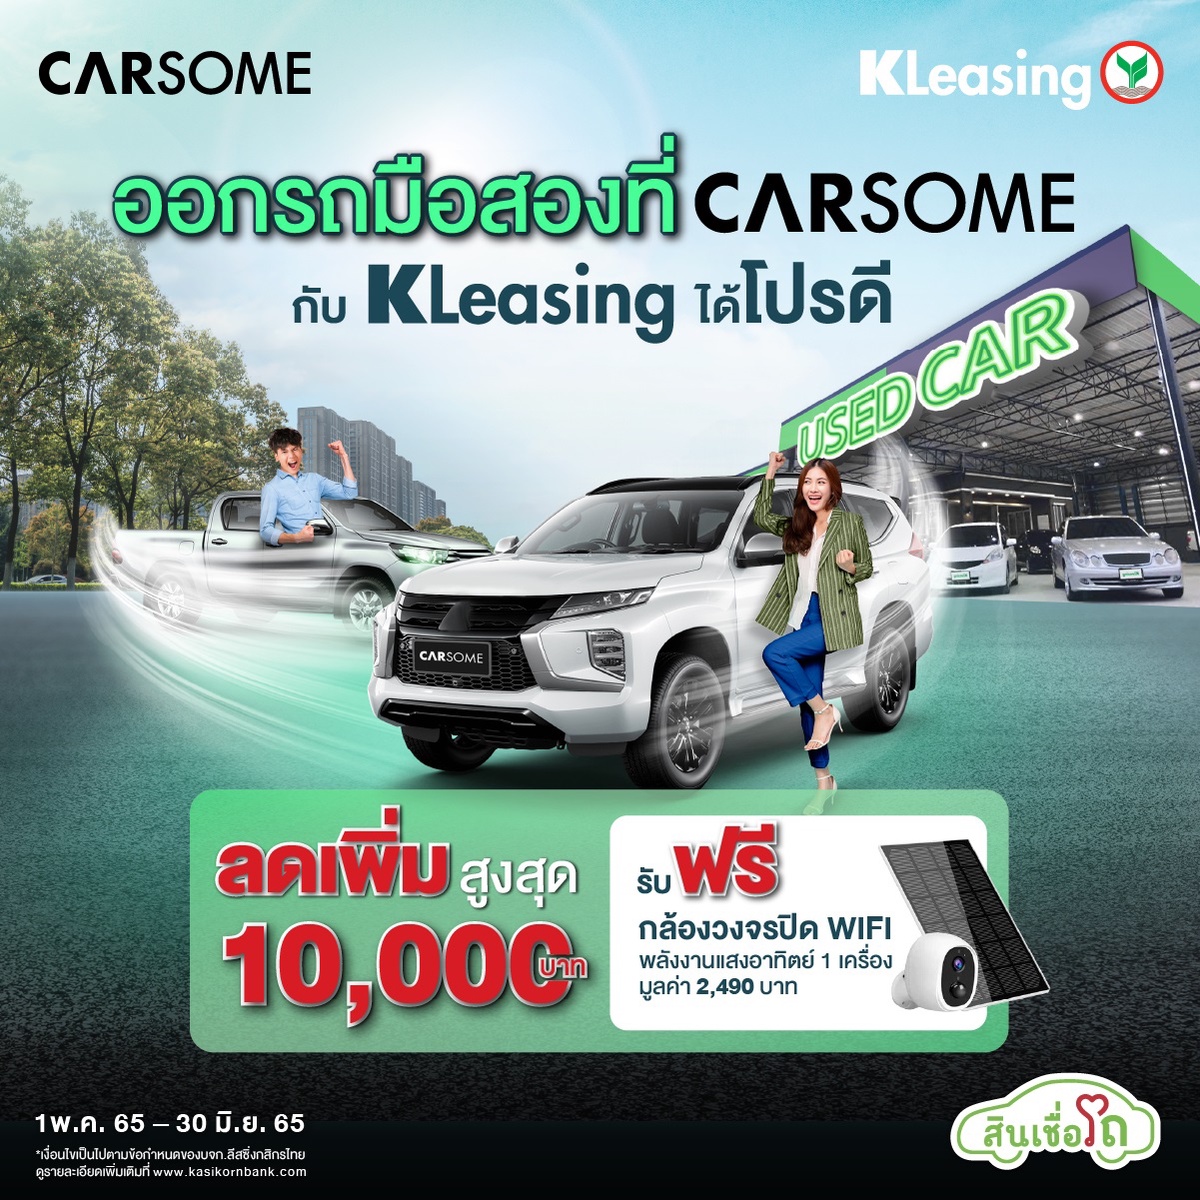 KLeasing joins with Carsome in launching a pre-owned car loan campaign, with maximum loan limit of 100% and low-interest installment payment plans